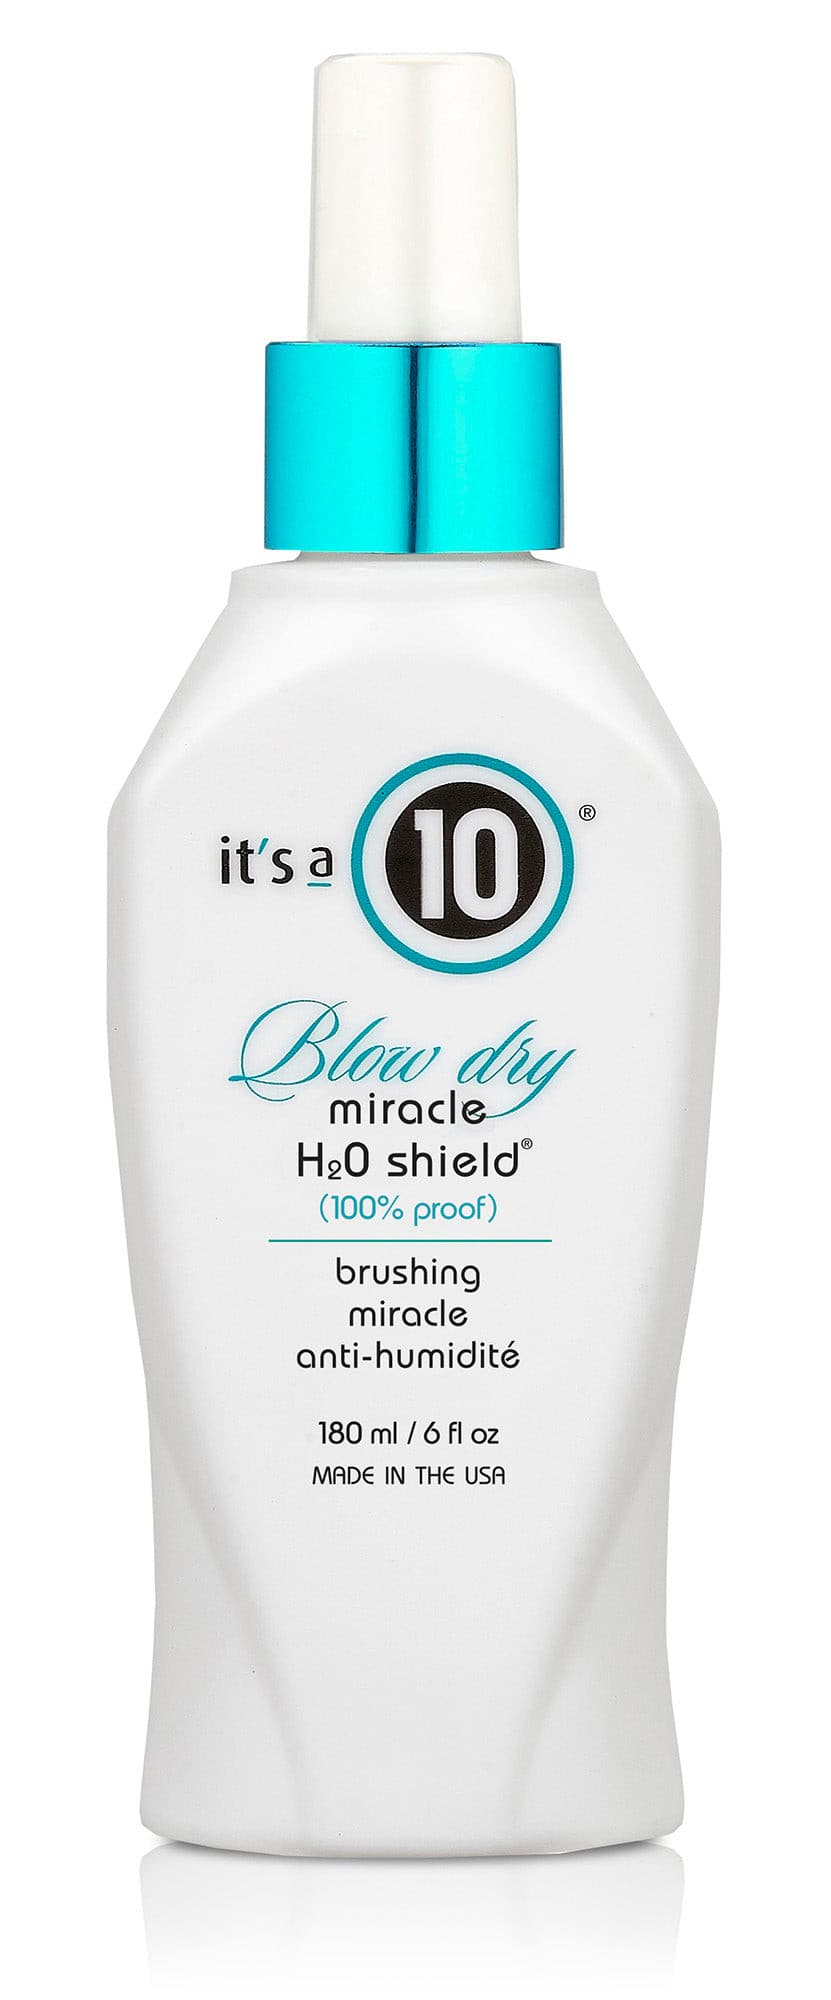 It's A 10 Blow Dry H2O Shield, Miracle - 180 ml